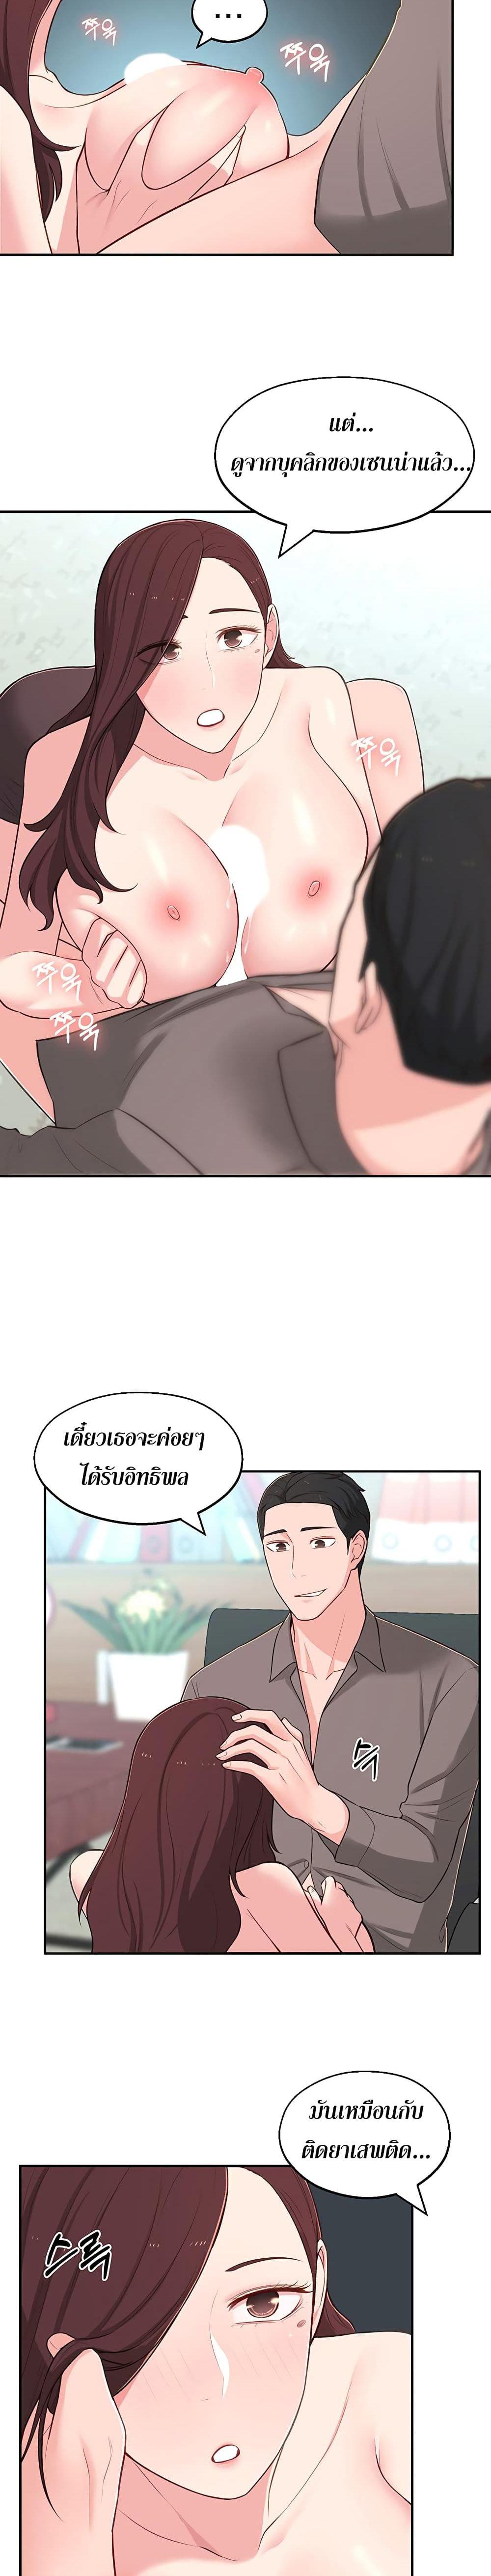 A Knowing Sister 12 ภาพ 19